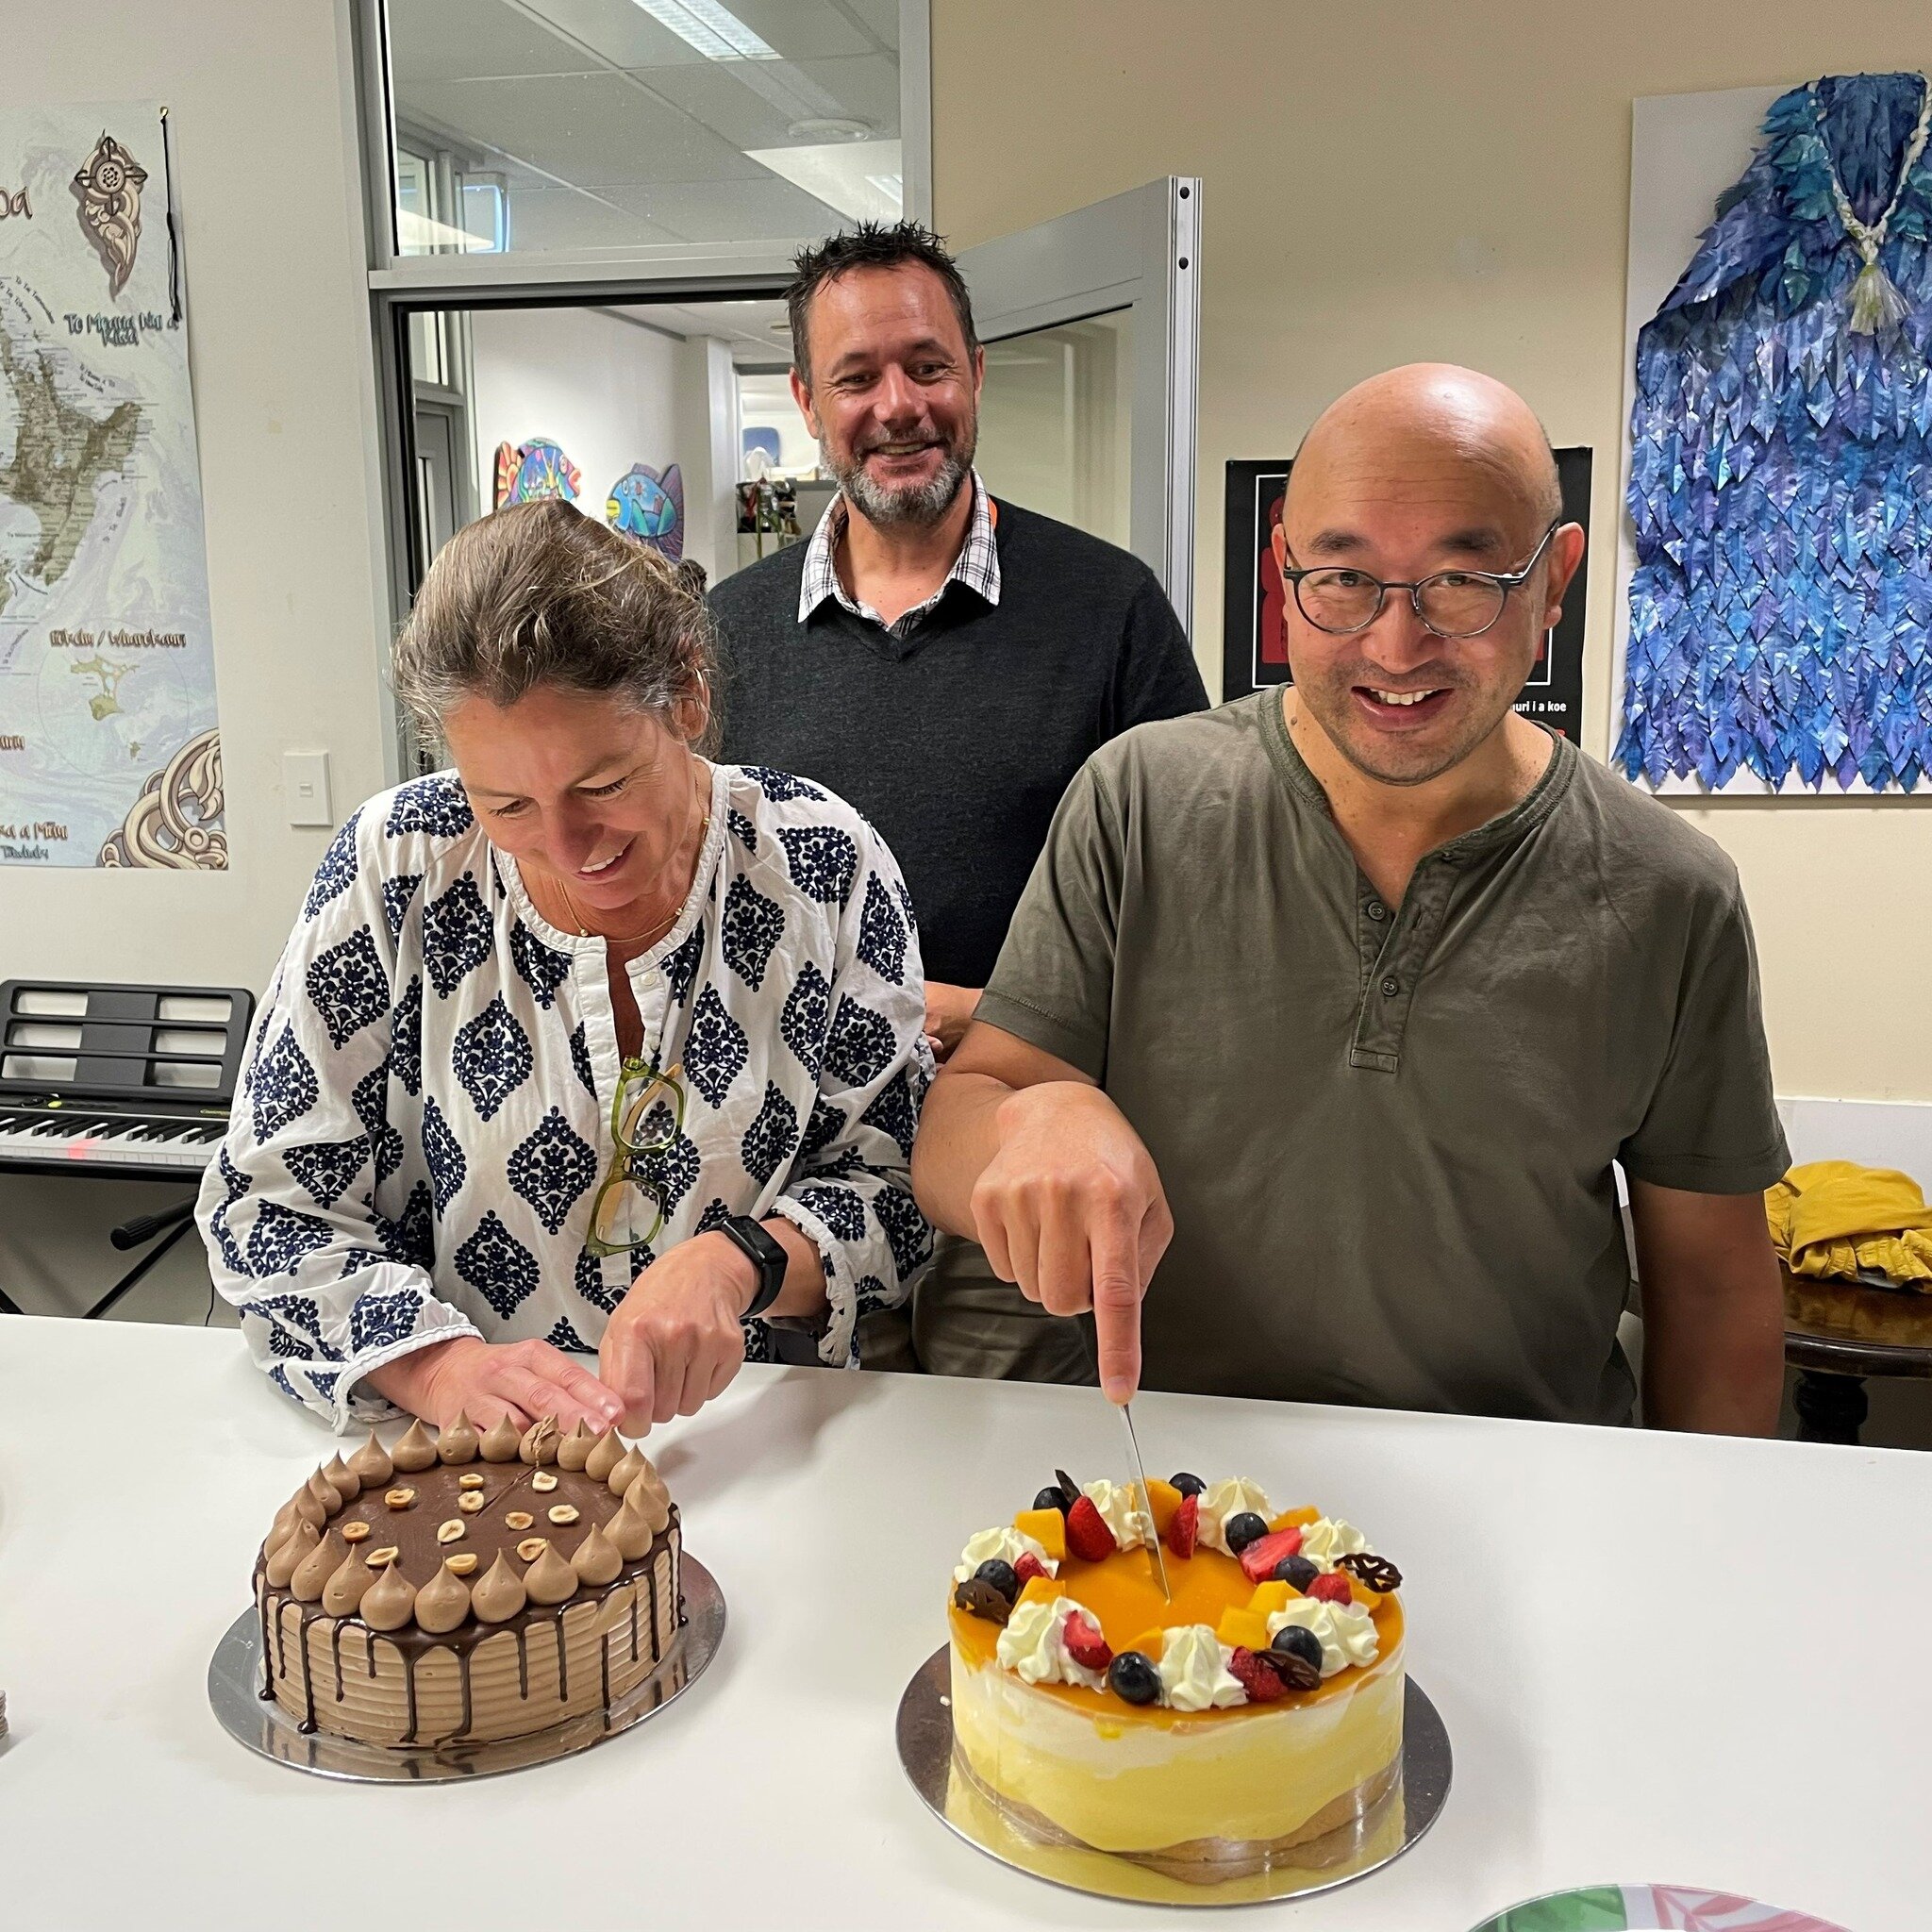 This month we are celebrating the 7th anniversary of the DCM Dental Service! On Friday 17 March we enjoyed some cake with Stephen Turnock, DCM&rsquo;s Manahautū (Director), Dr. Morris Wong, who was leading a session that morning, and our lead DA, Sus